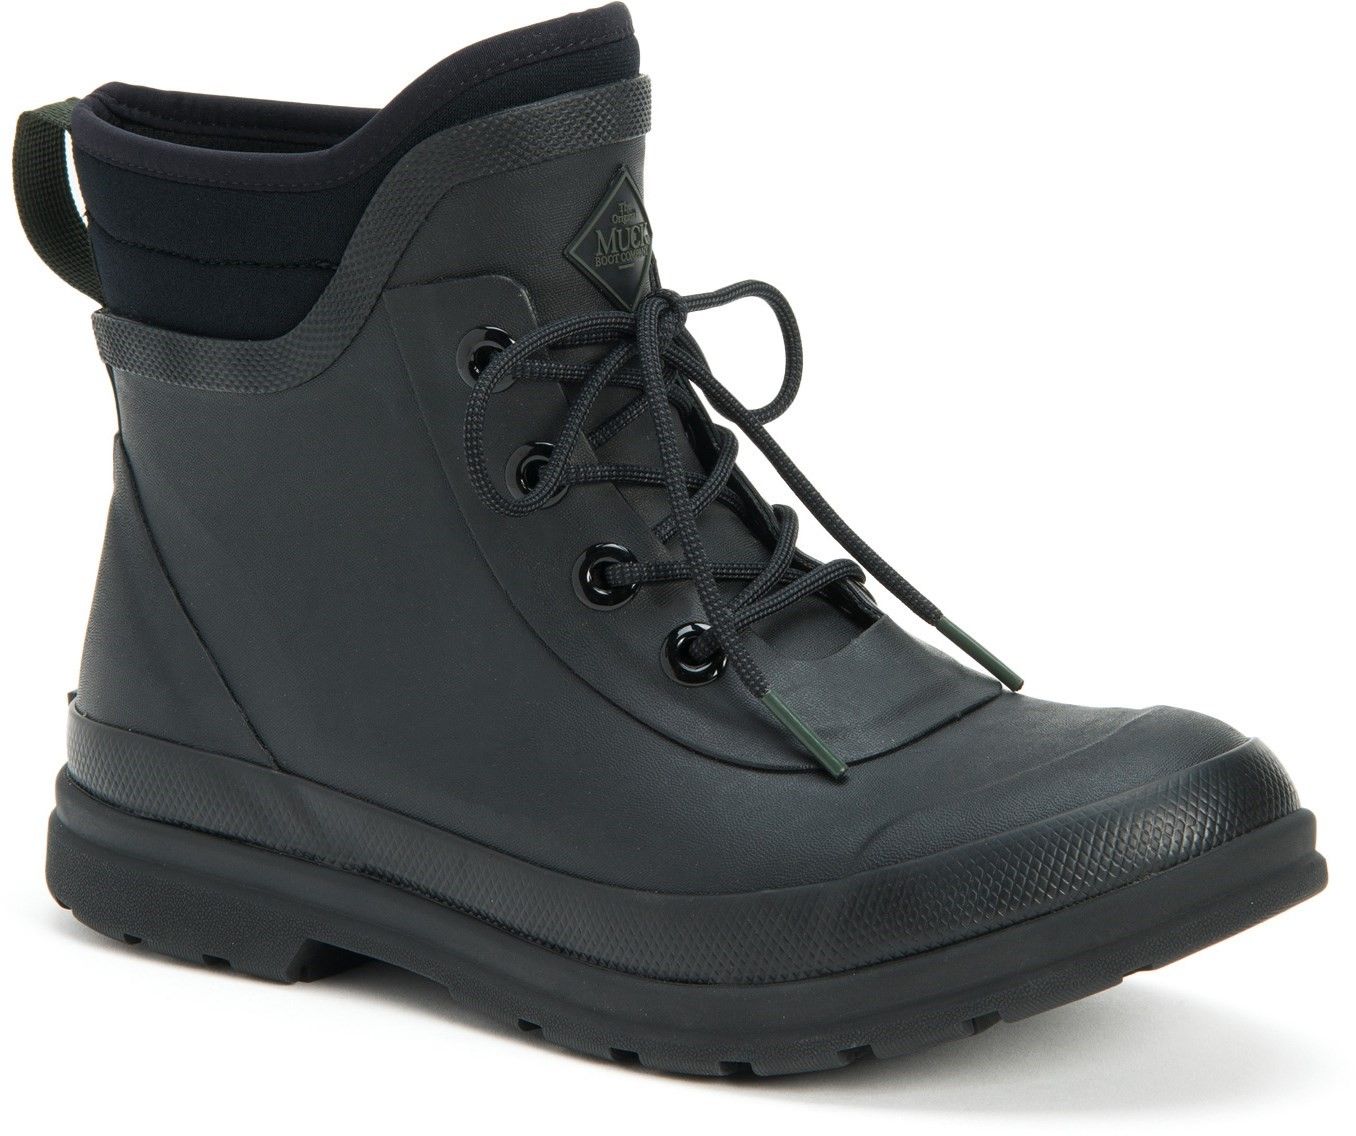 Originals Lace Up Boot by Muck Boots - Neoprene booties are wrapped in soft rubber for comfortable waterproof protection. Moulded PU footbeds with memory foam top covers offer maximum comfort and the antimicrobial insert topcover keeps you fresh100% Waterproof. 
Full Neoprene Bootie exposed at collar for added comfort. 
Moulded PU insert with memory foam for superior underfoot comfort. 
Antimicrobial insert topcover for odour and moisture management. 
Easy on/off design.